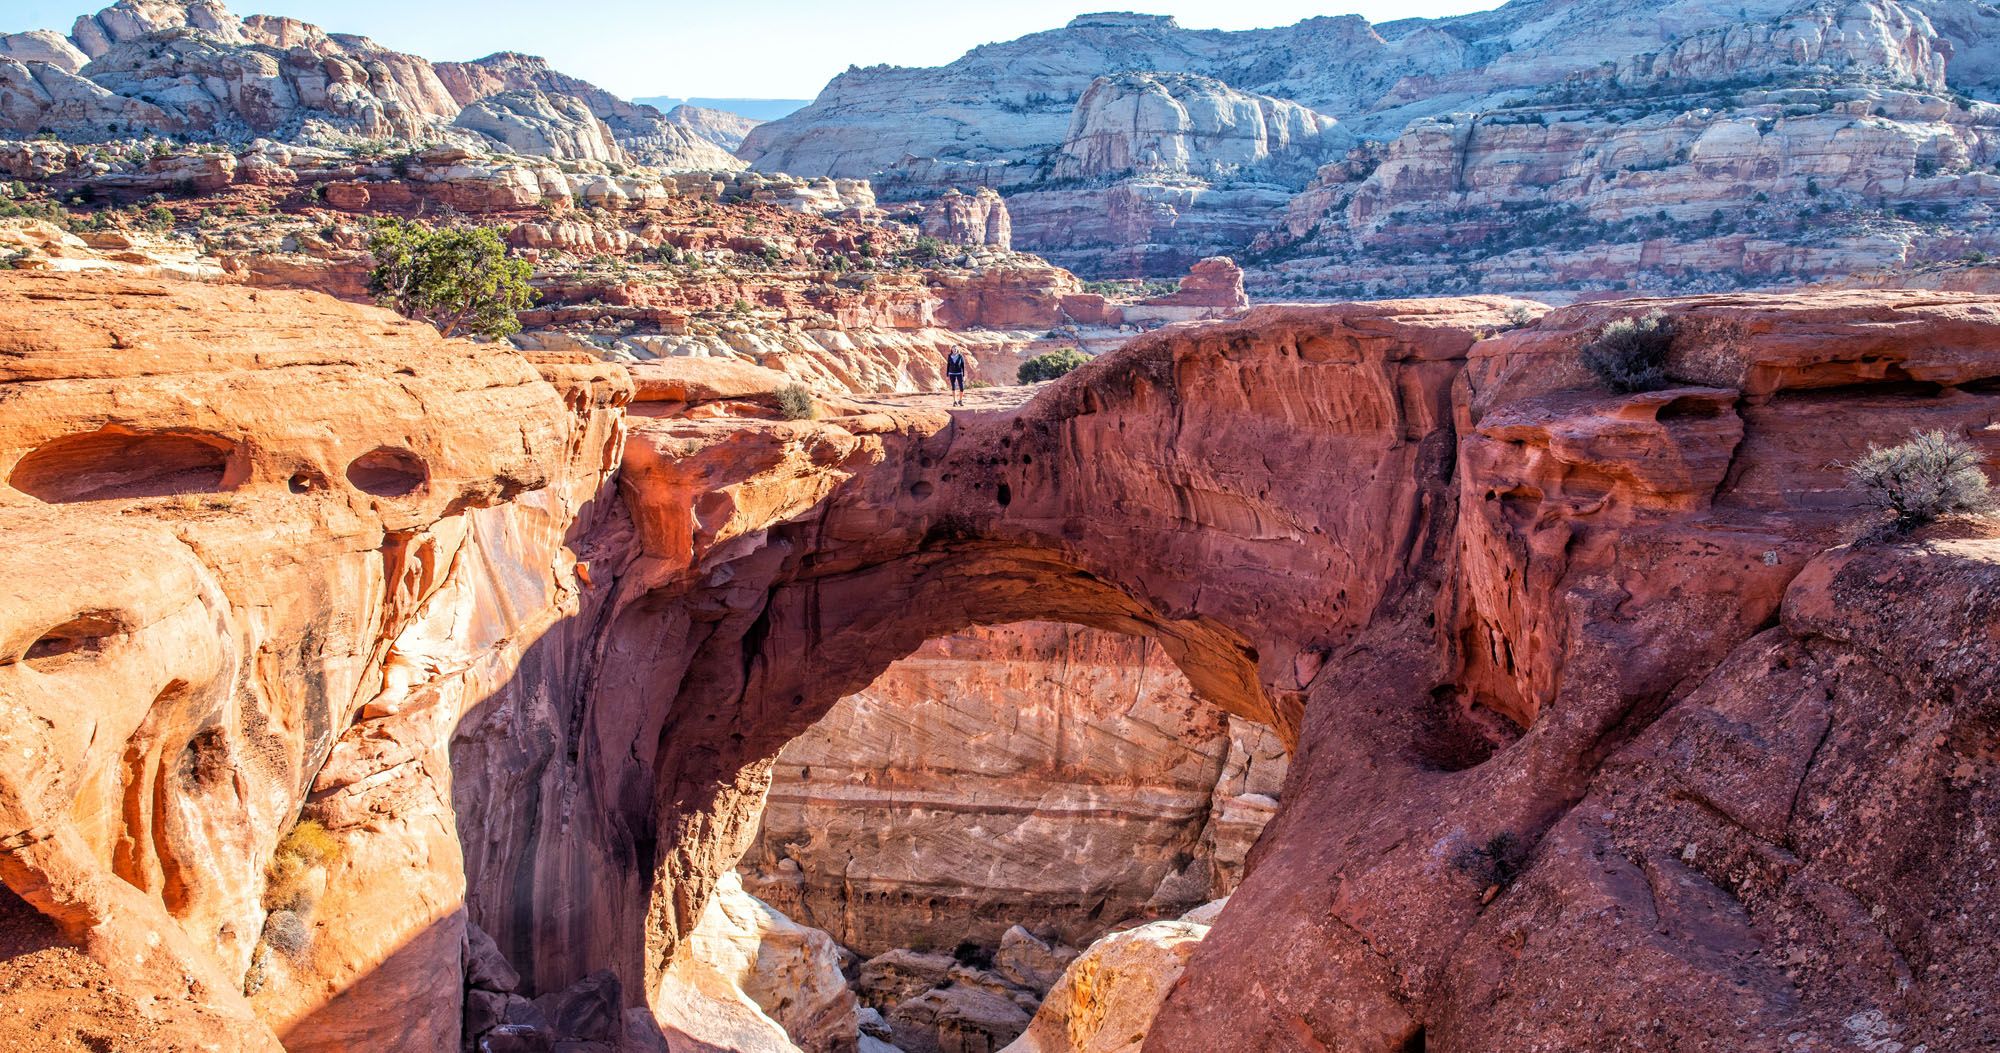 Featured image for “Cassidy Arch, An Essential Hike in Capitol Reef National Park”